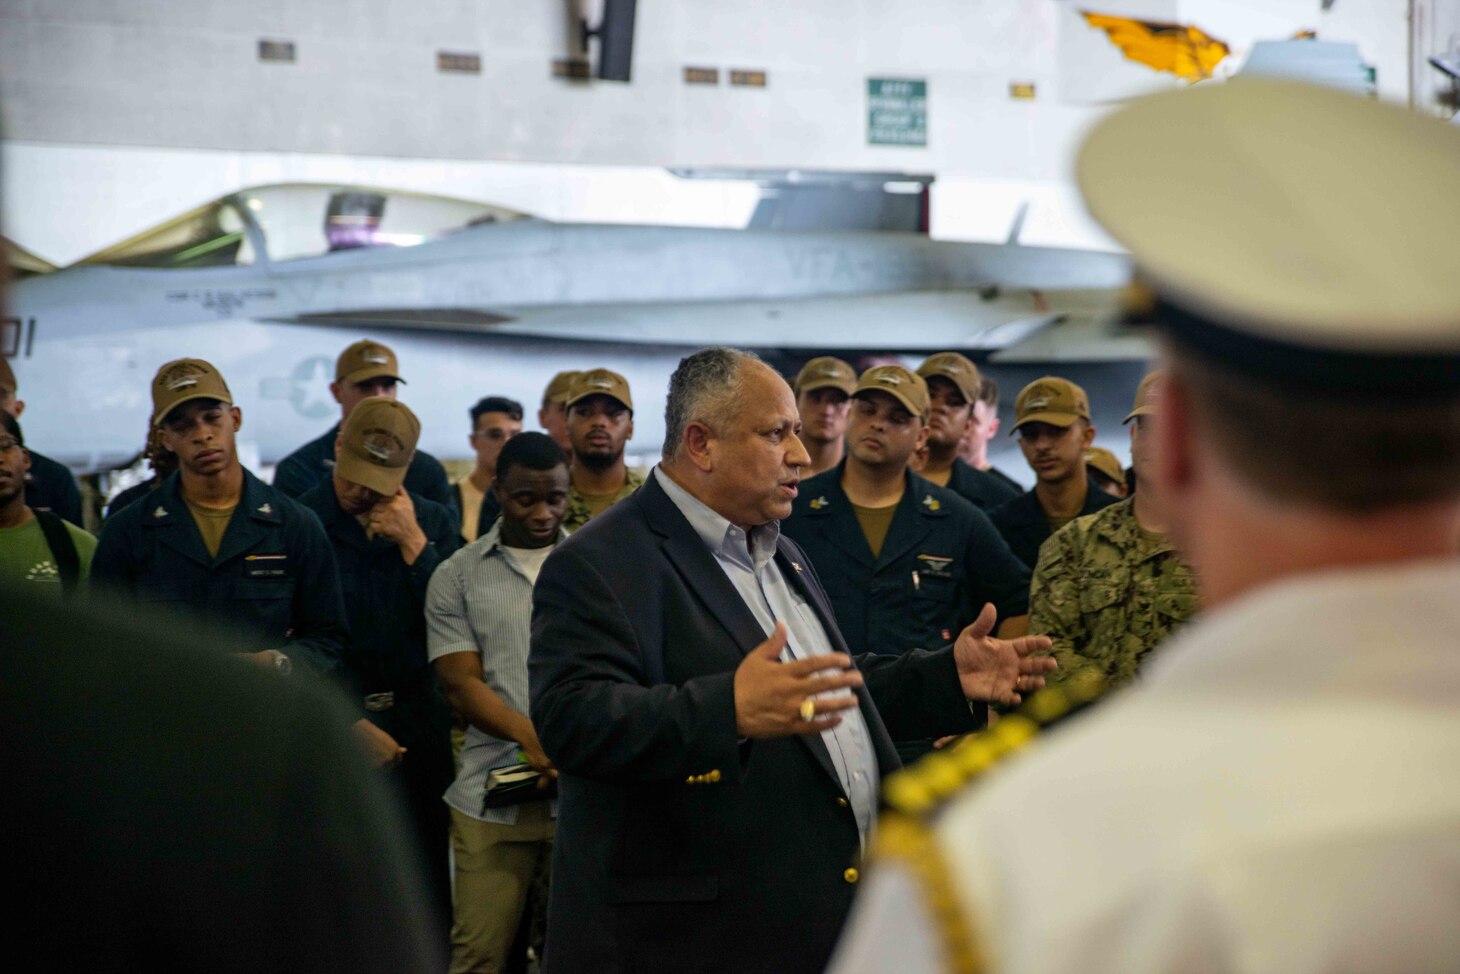 CHANGI NAVAL BASE, Singapore (July 22, 2022) – Secretary of the Navy Carlos Del Toro meets with Sailors in the hangar bay of the U.S. Navy’s only forward-deployed aircraft carrier USS Ronald Reagan (CVN 76). During Del Toro’s visit, he held a press conference and addressed the crew over the ships 1MC. Ronald Reagan, the flagship of Carrier Strike Group 5, provides a combat-ready force that protects and defends the United States, and supports alliances, partnerships and collective maritime interests in the Indo-Pacific region. (U.S. Navy photo by Mass Communication Specialist 3rd Class Gray Gibson)